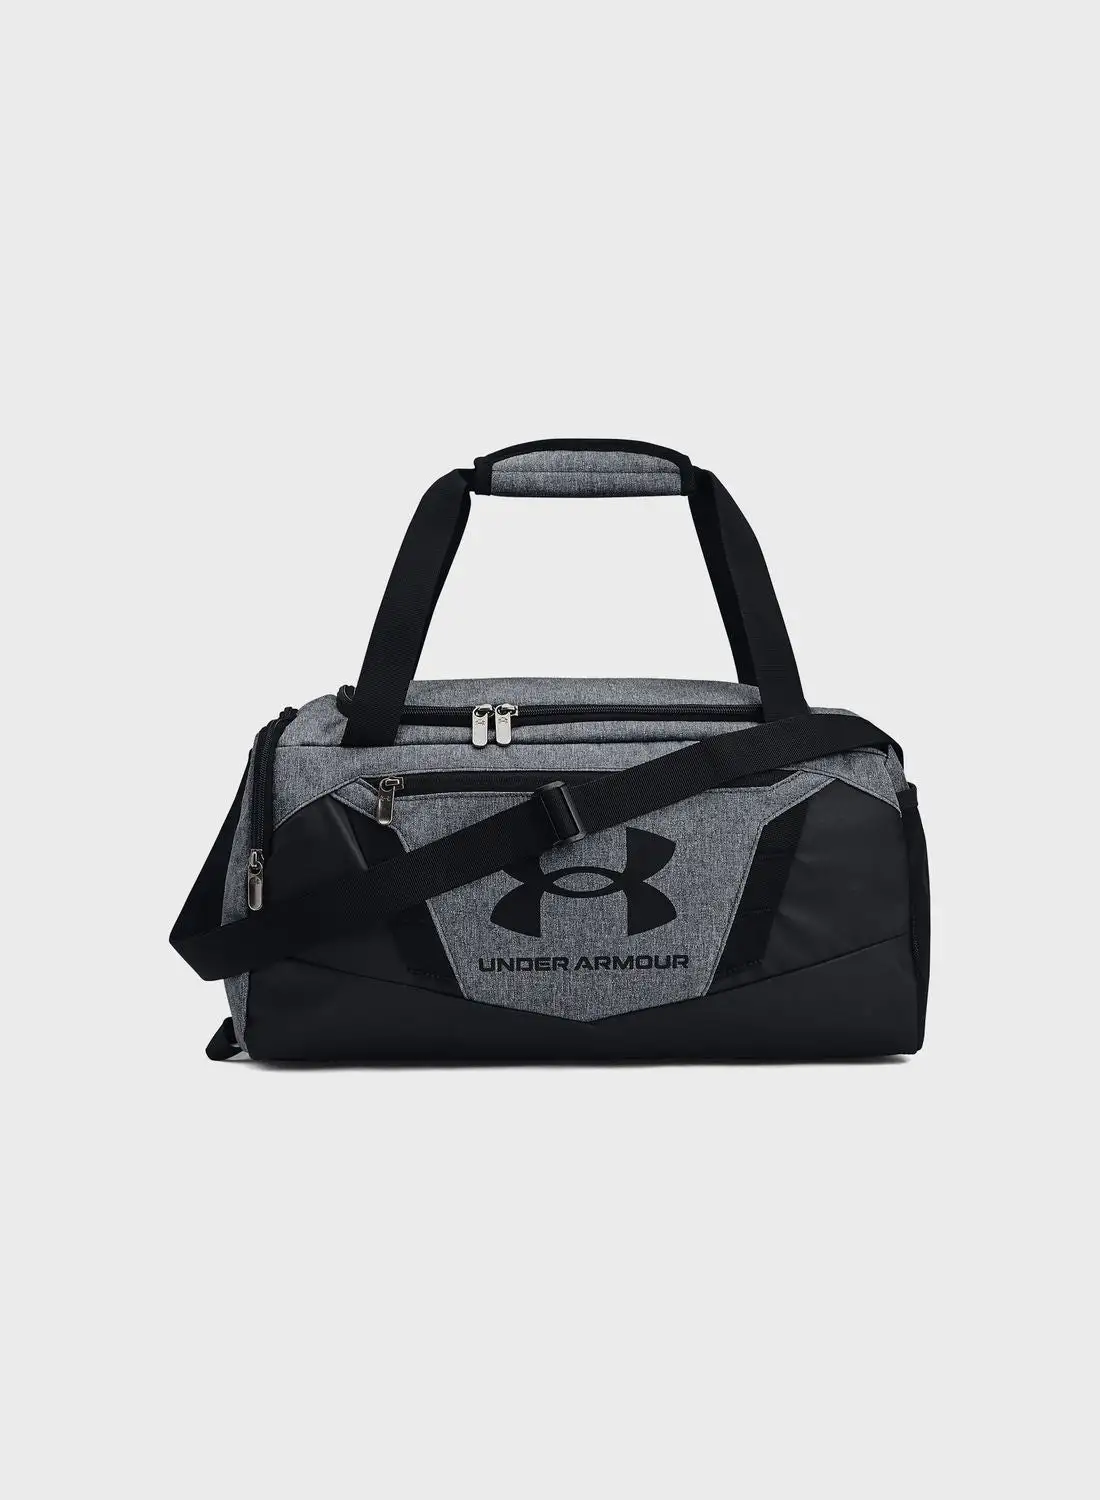 UNDER ARMOUR Undeniable 5.0 Duffle -Xs